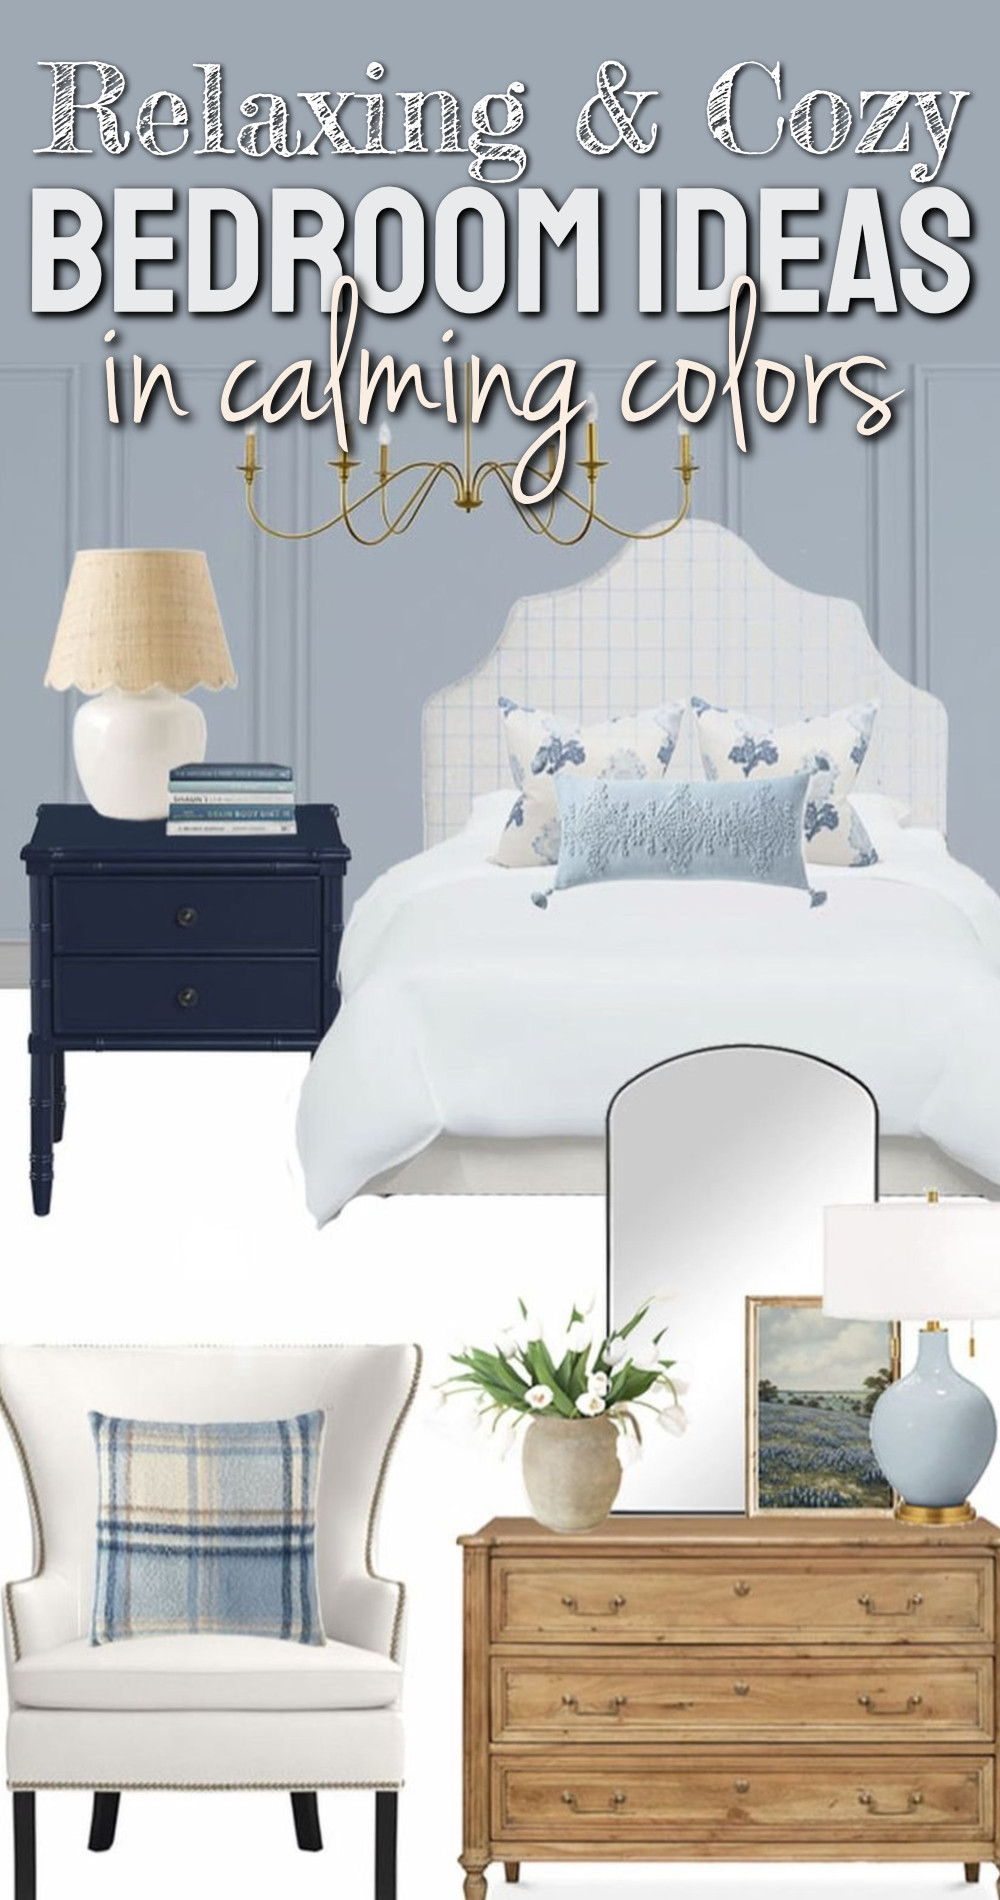 Relaxing and Cozy Bedroom Ideas In Calming Colors For a Peaceful Oasis